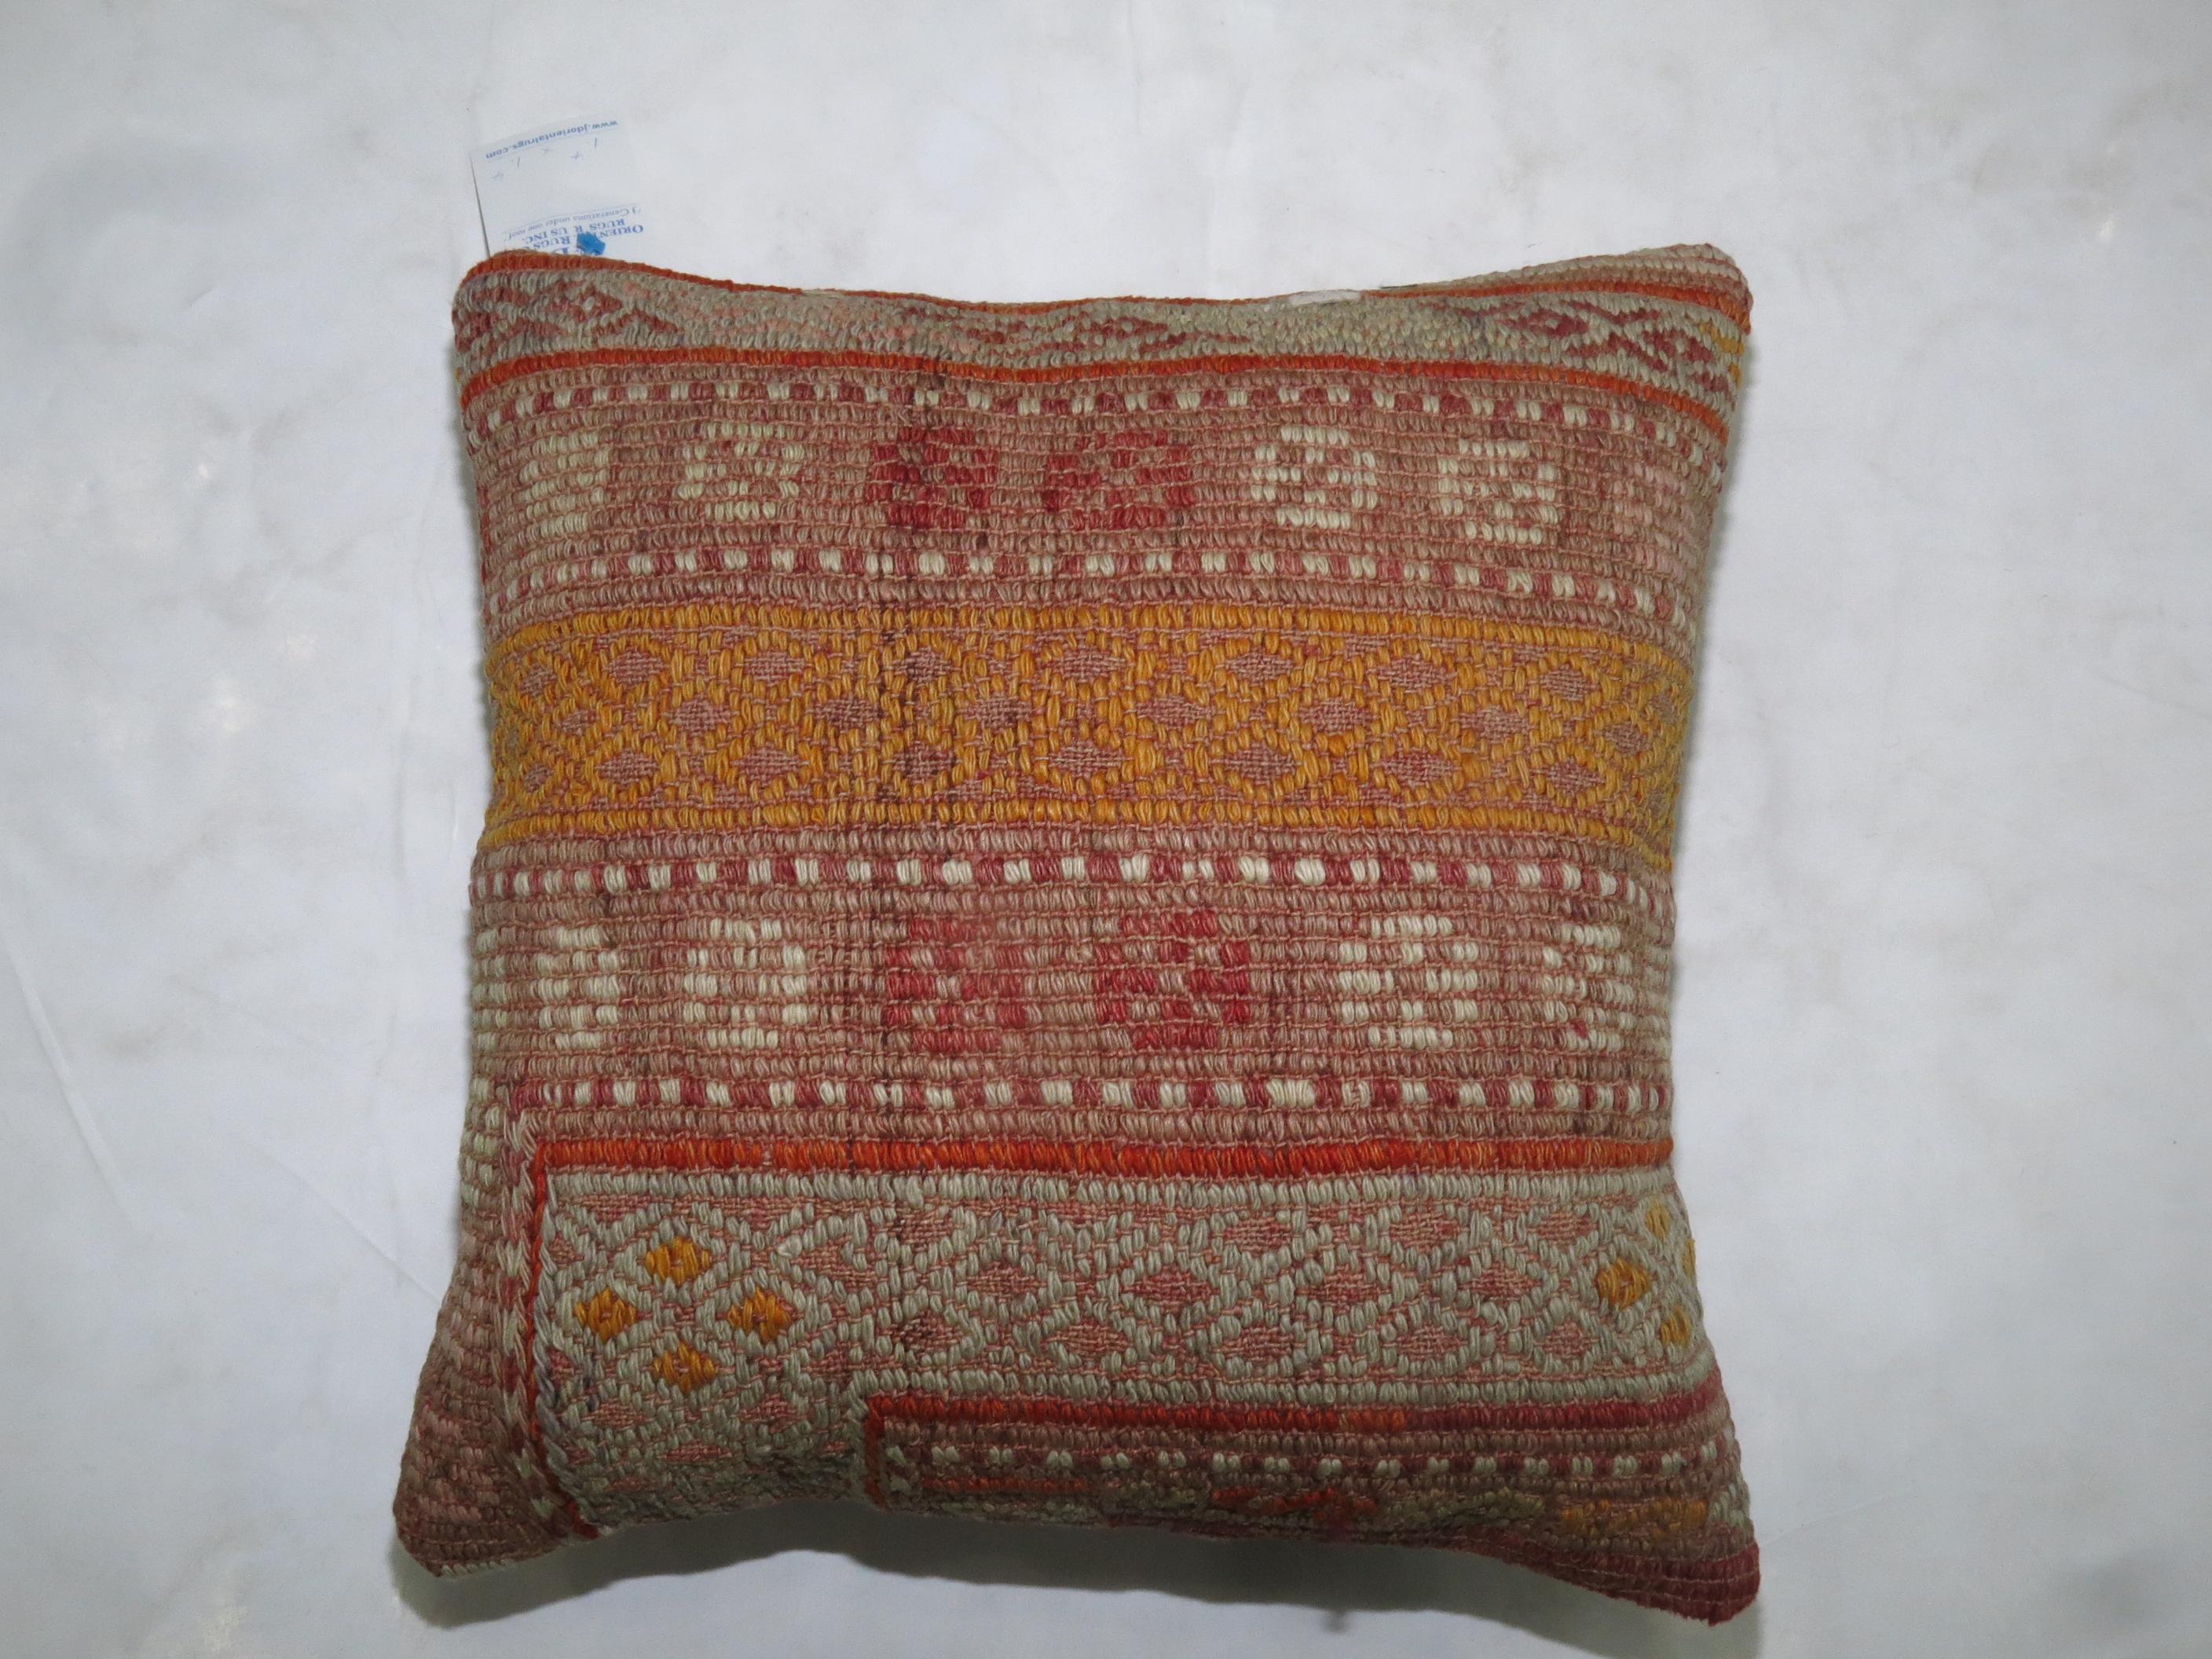 Pillow made from a Turkish flat-weave pillow

Measures: 16'' x 16''.